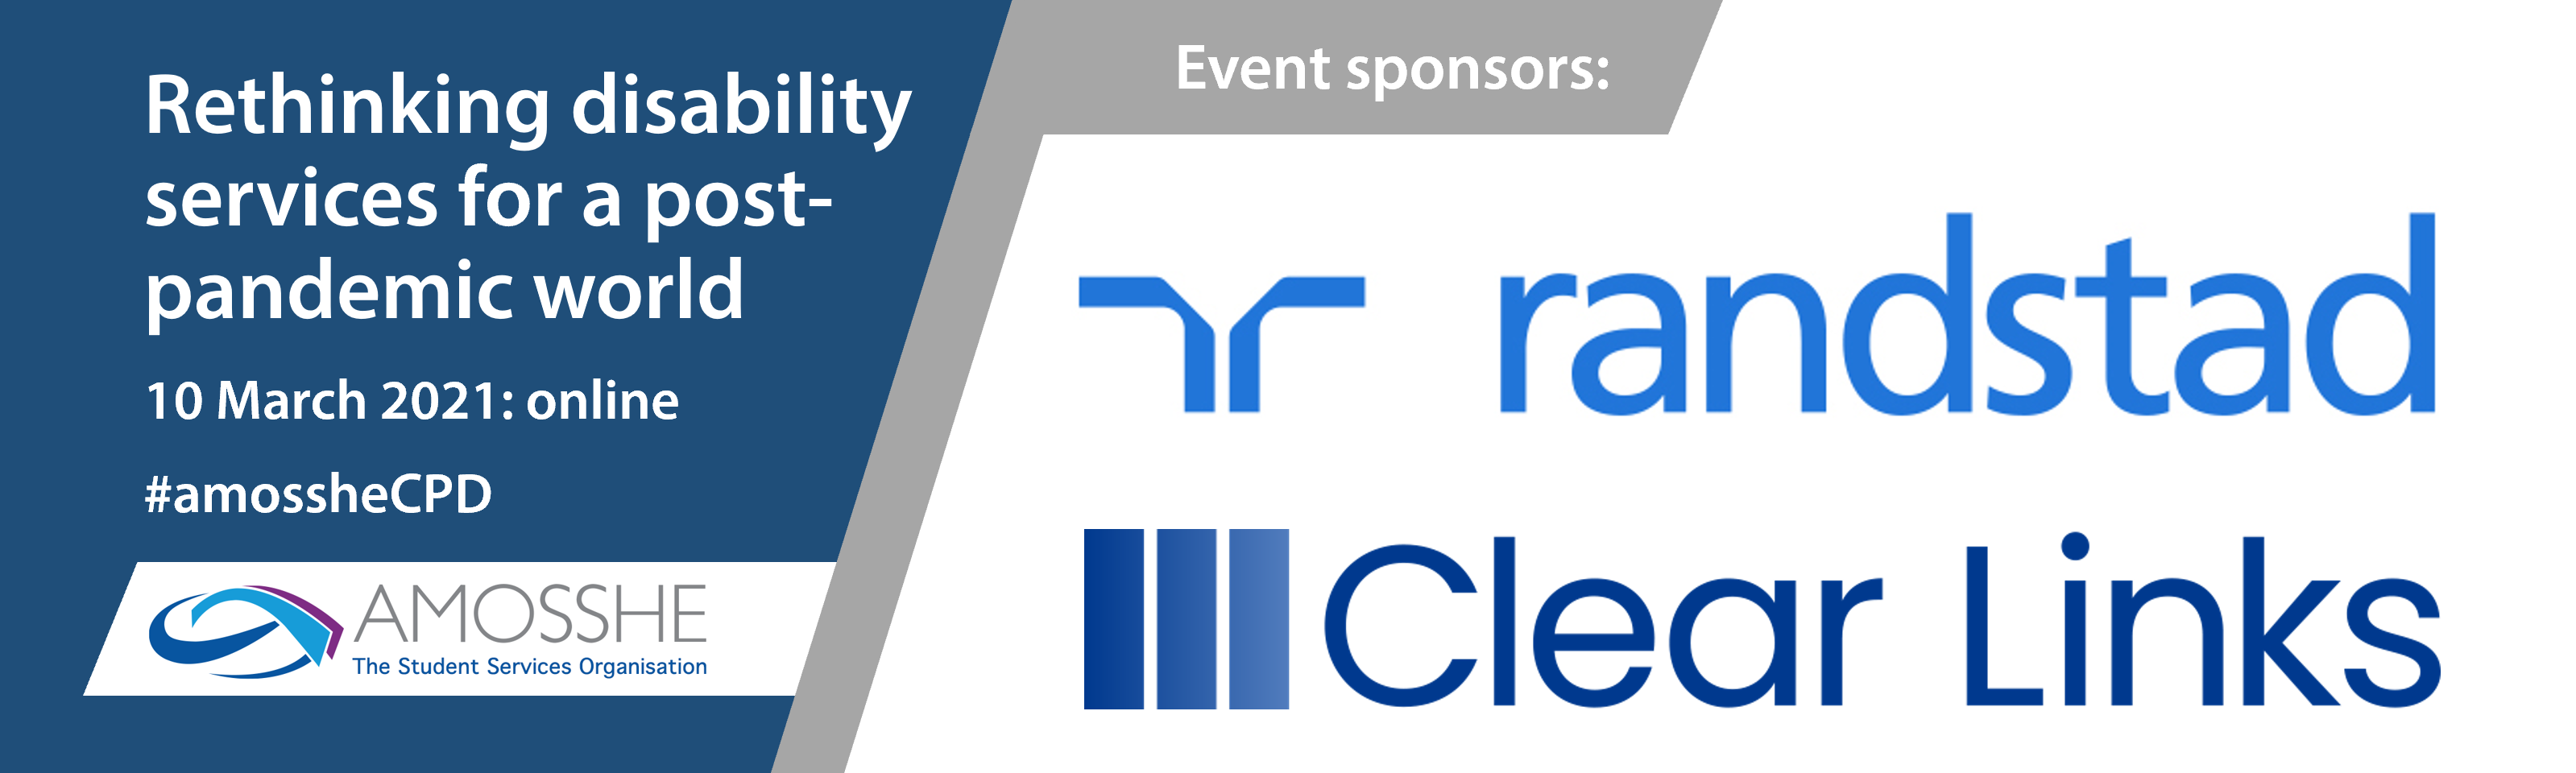 Event sponsors Randstad and Clear Links